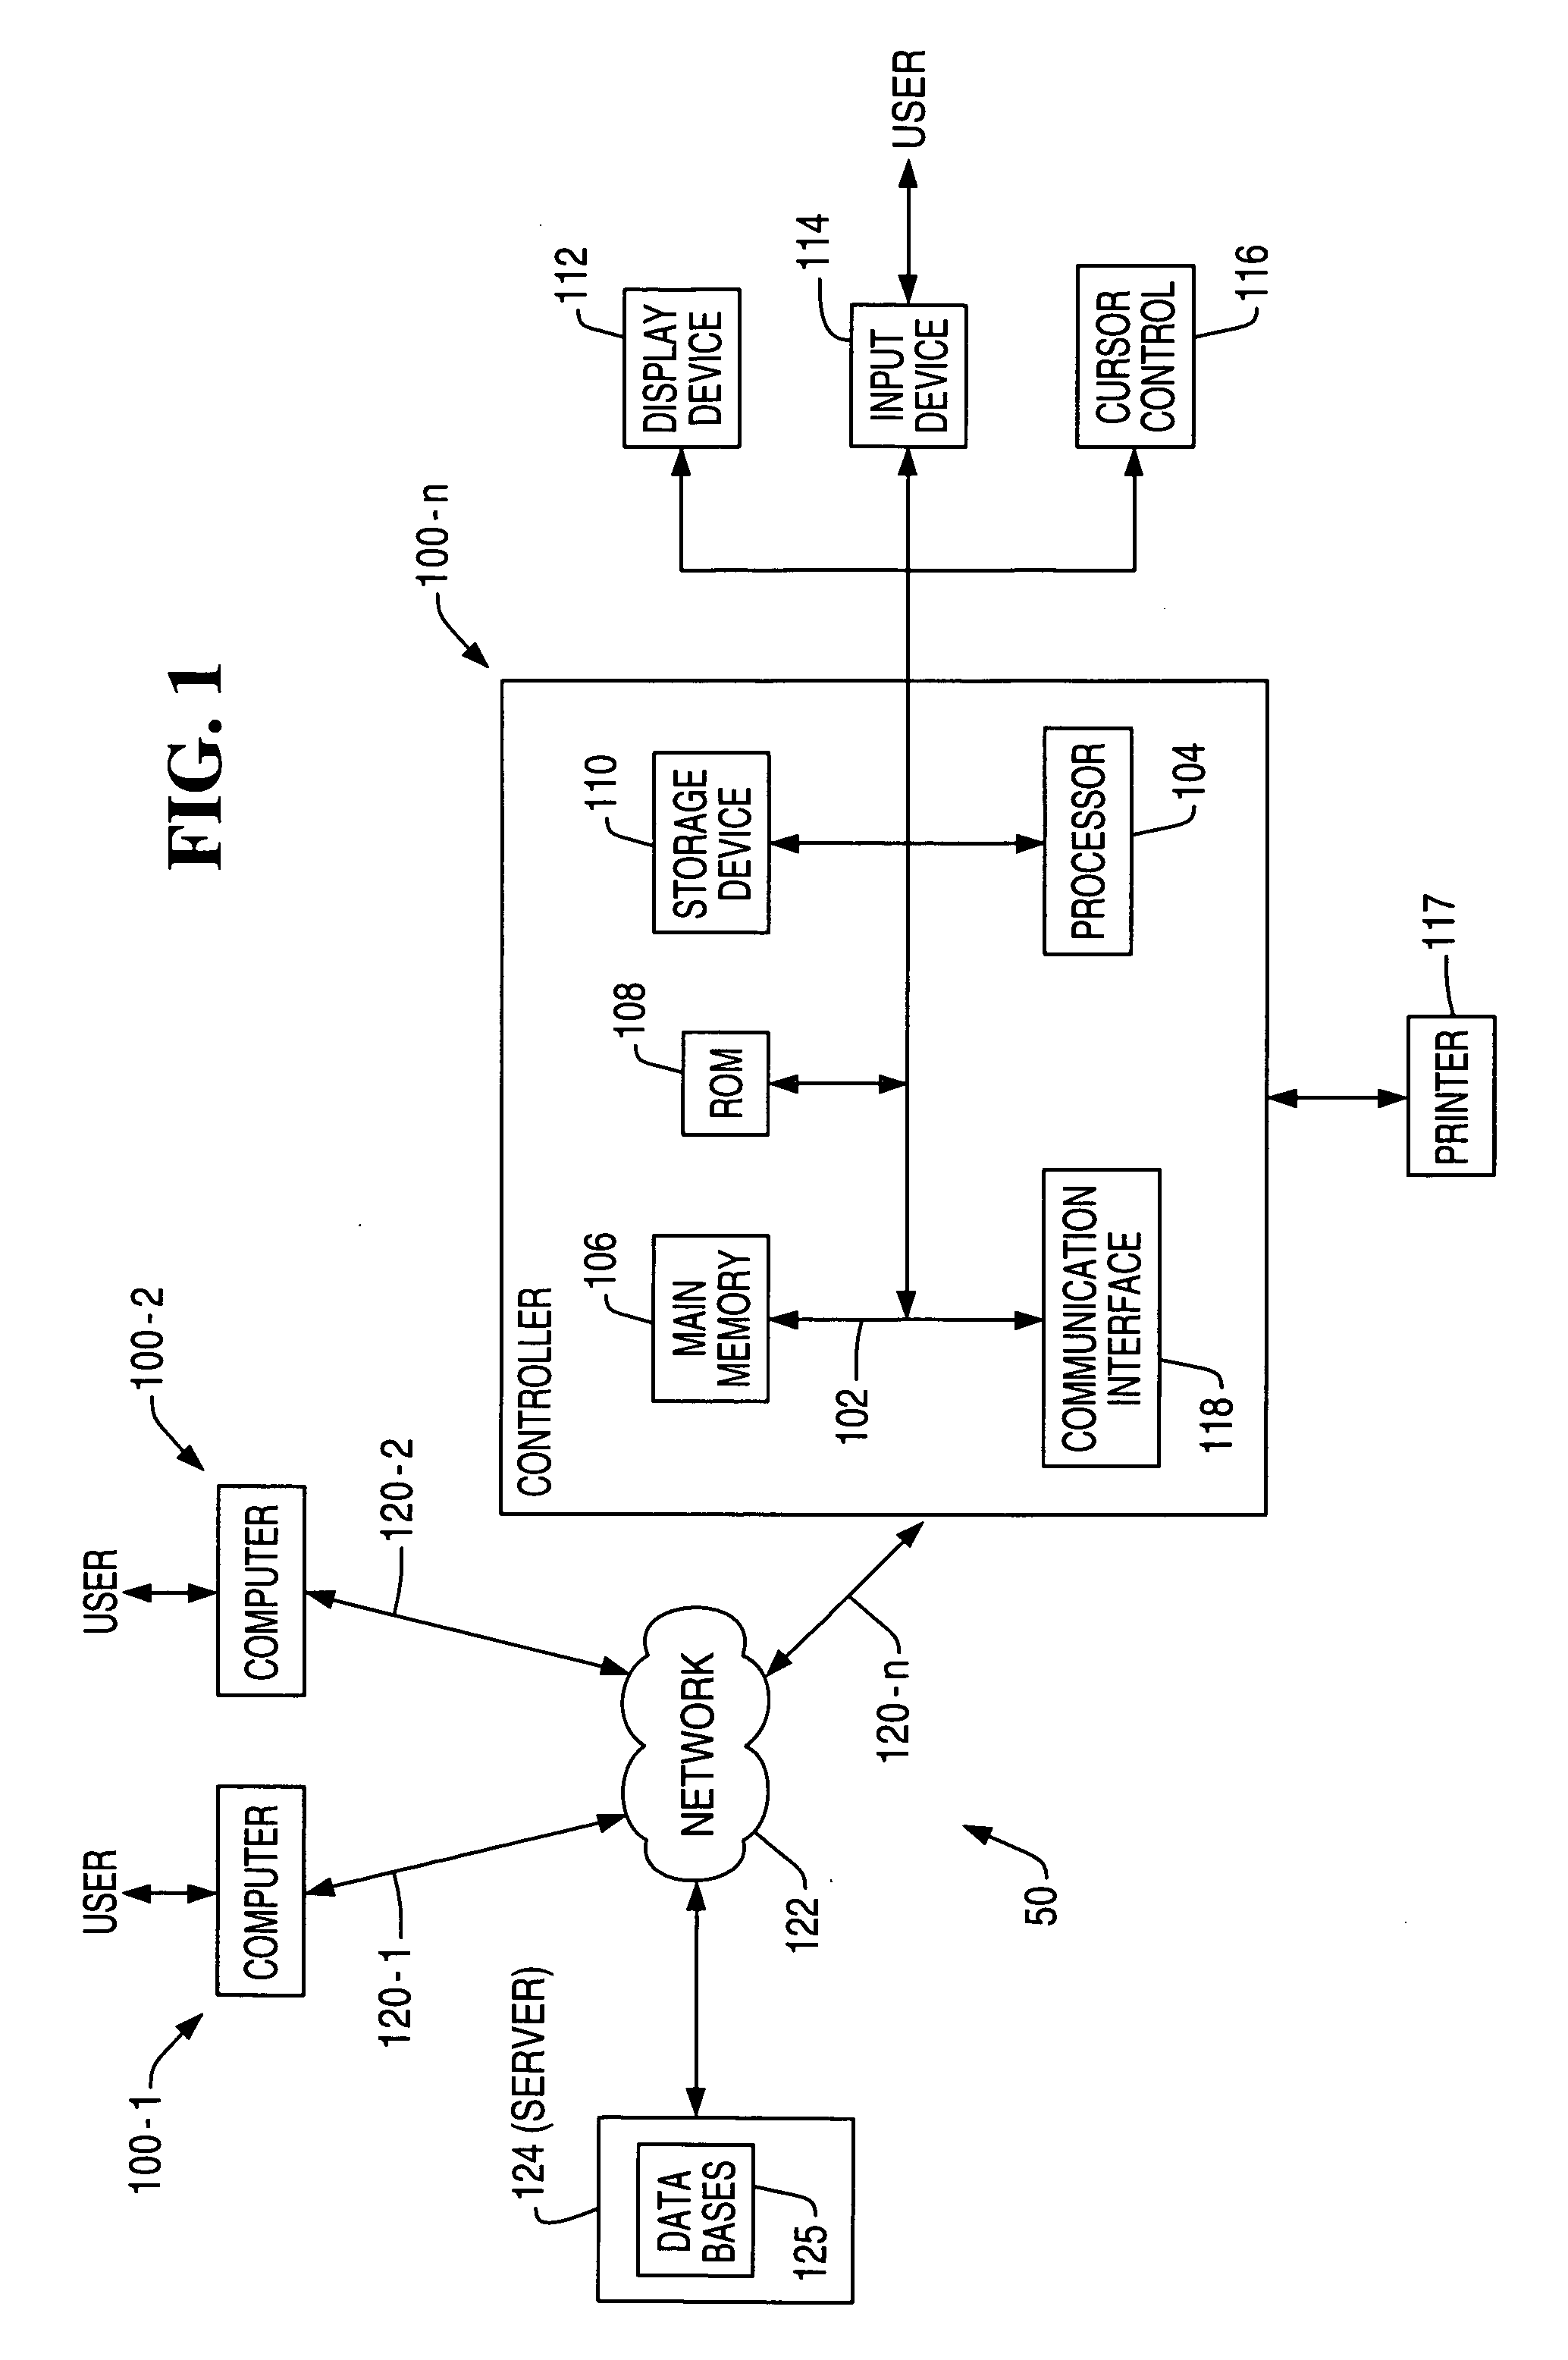 Method of generating user customized document incorporating at least a portion of discovery information recorded in the system of record database in data warehouse environment